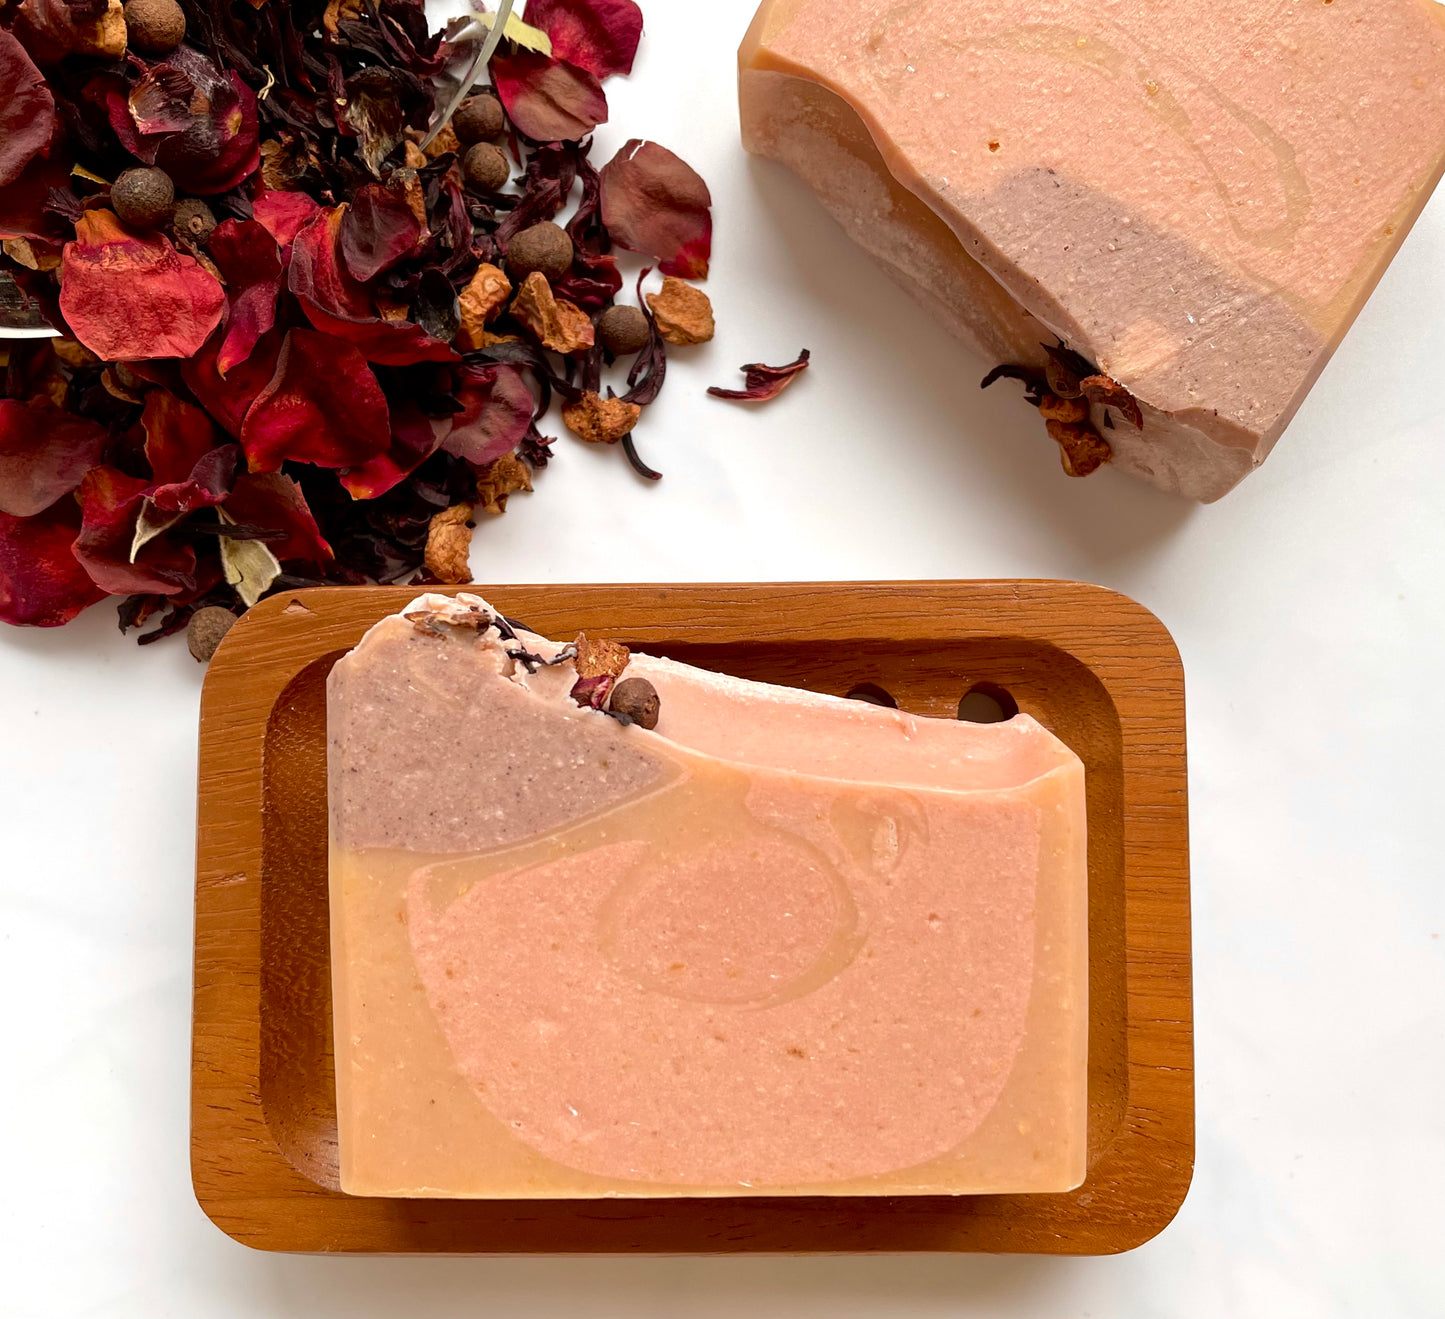 Love Soak contains sea buckthorn oil & purple and rose clays. Topped with rose petals and whole dry spices.